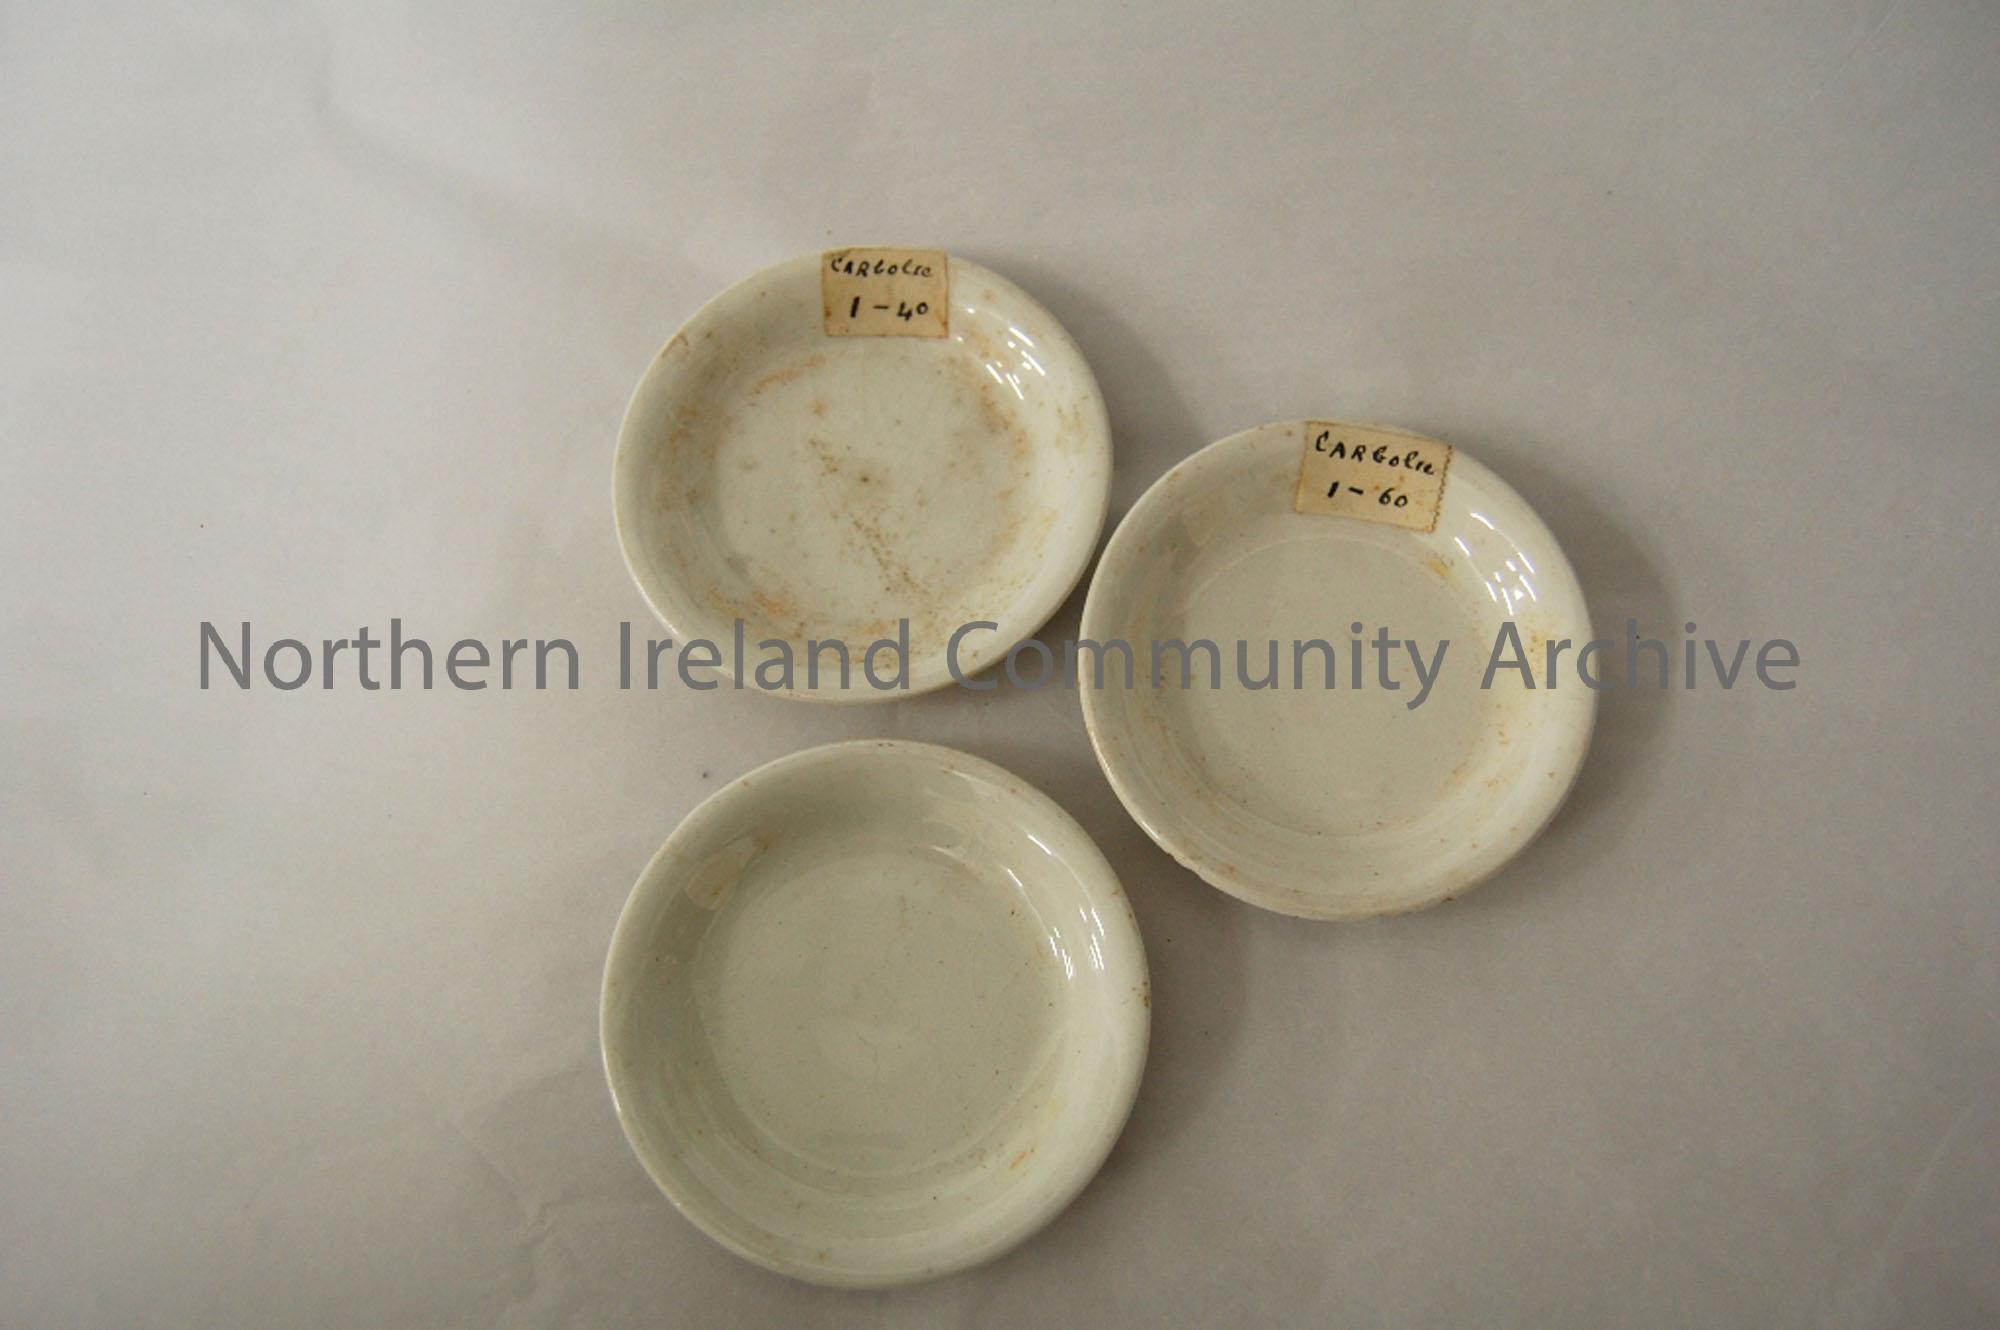 3 small white saucers (two of which labelled: “Carbolic 1-40” & “Carbolic 1-60”)